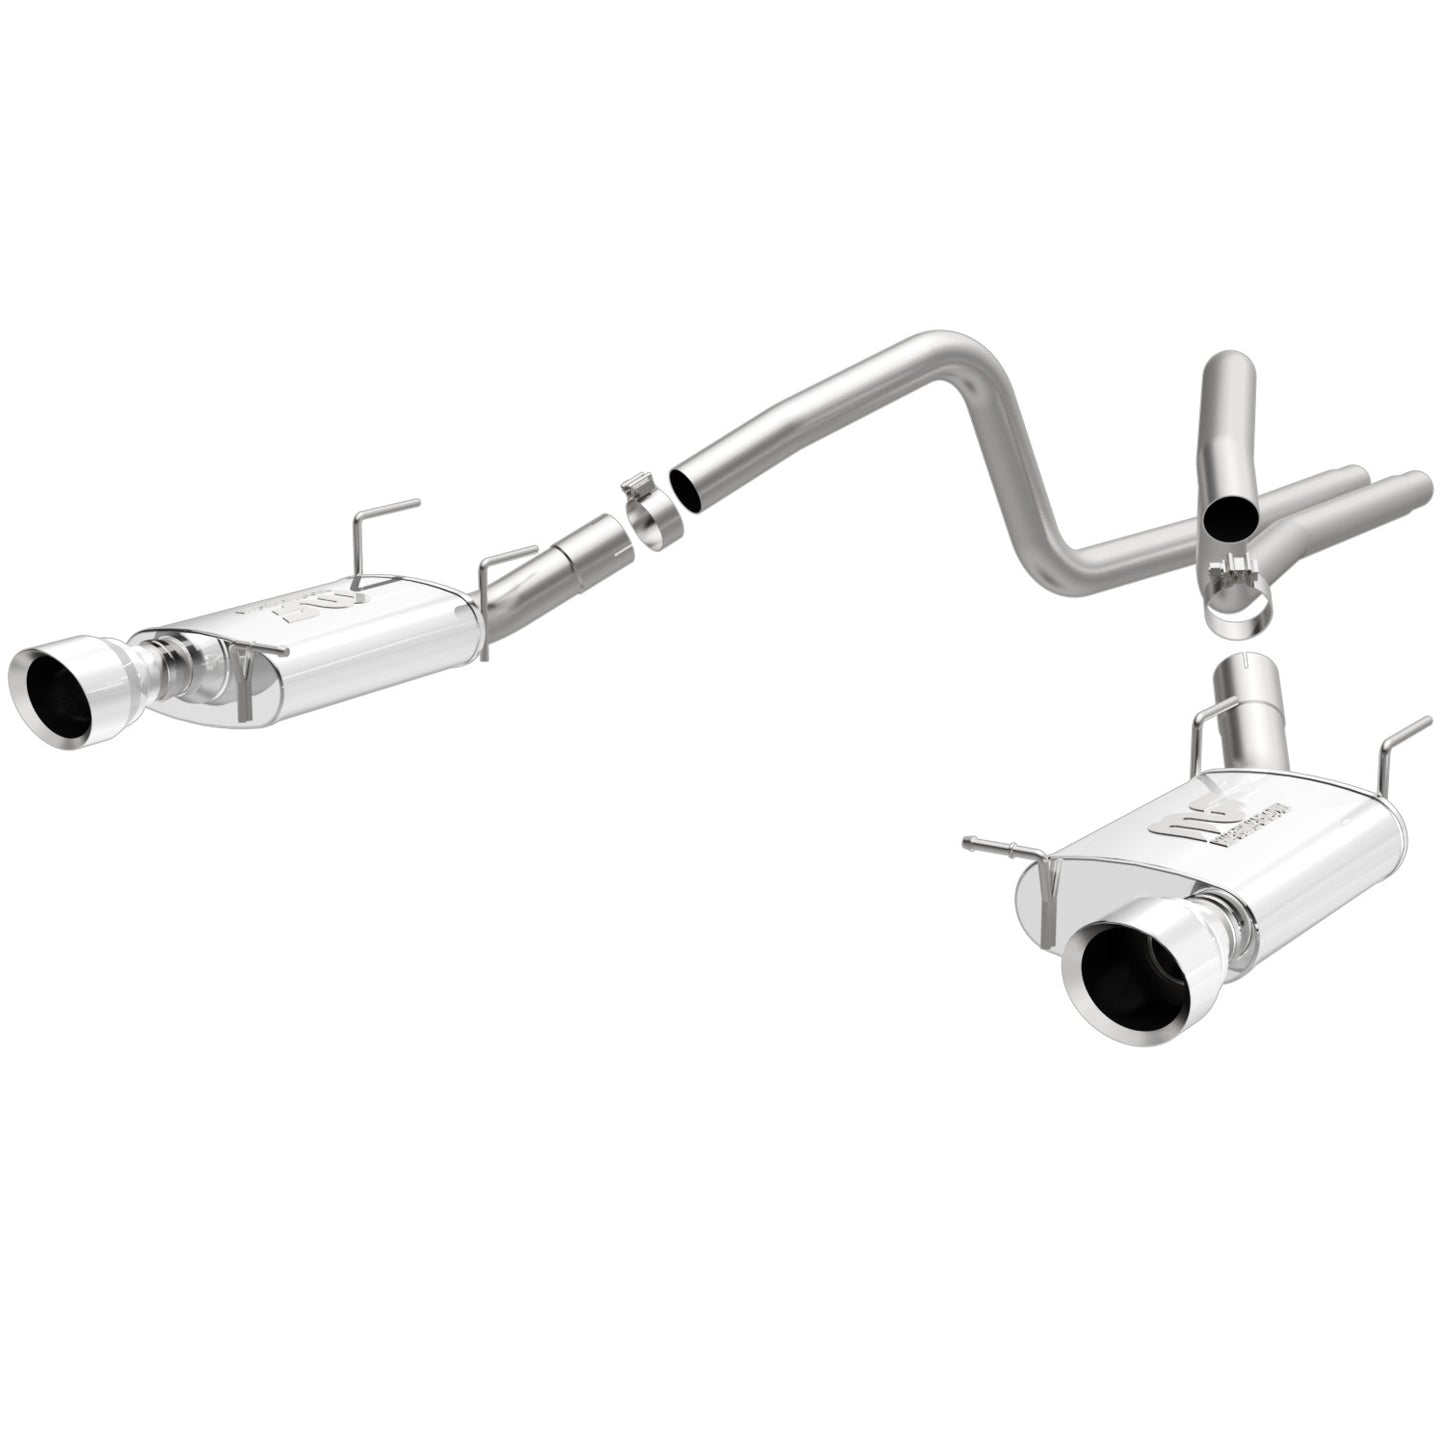 MagnaFlow Street Series Cat-Back Performance Exhaust System 15244